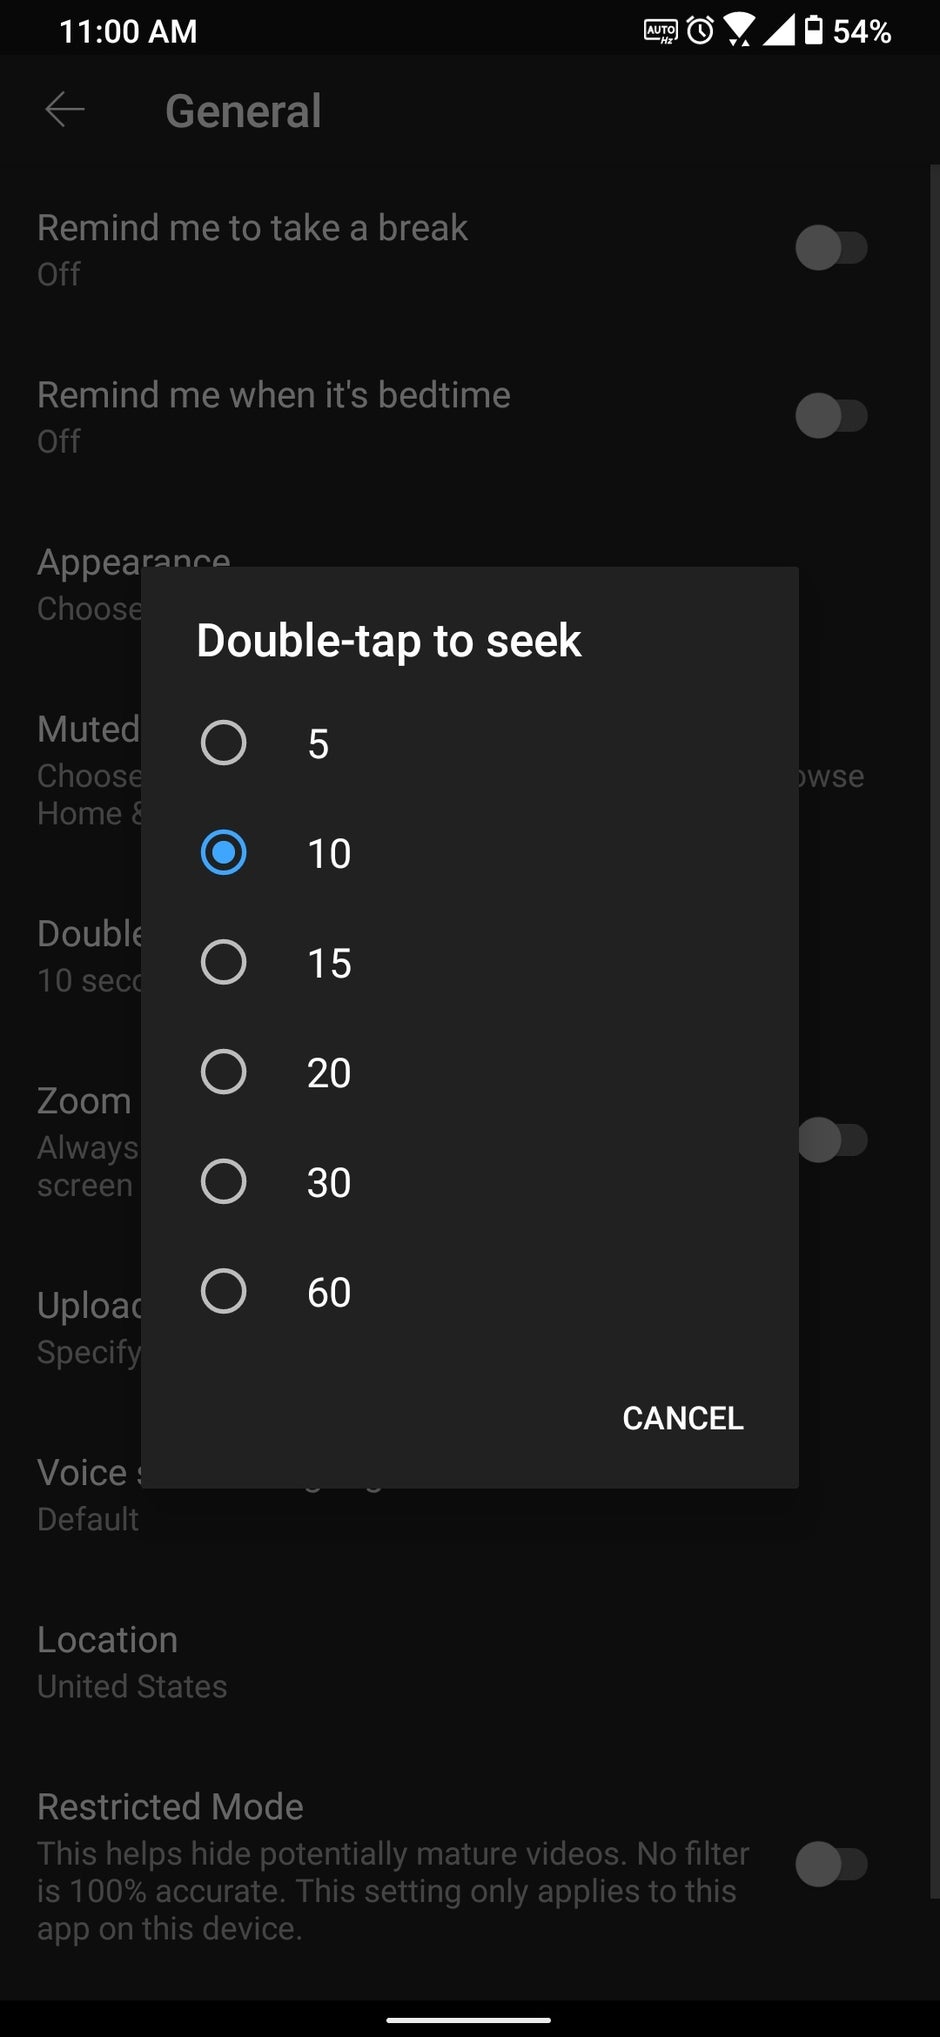 YouTube app tips and tricks (2021)